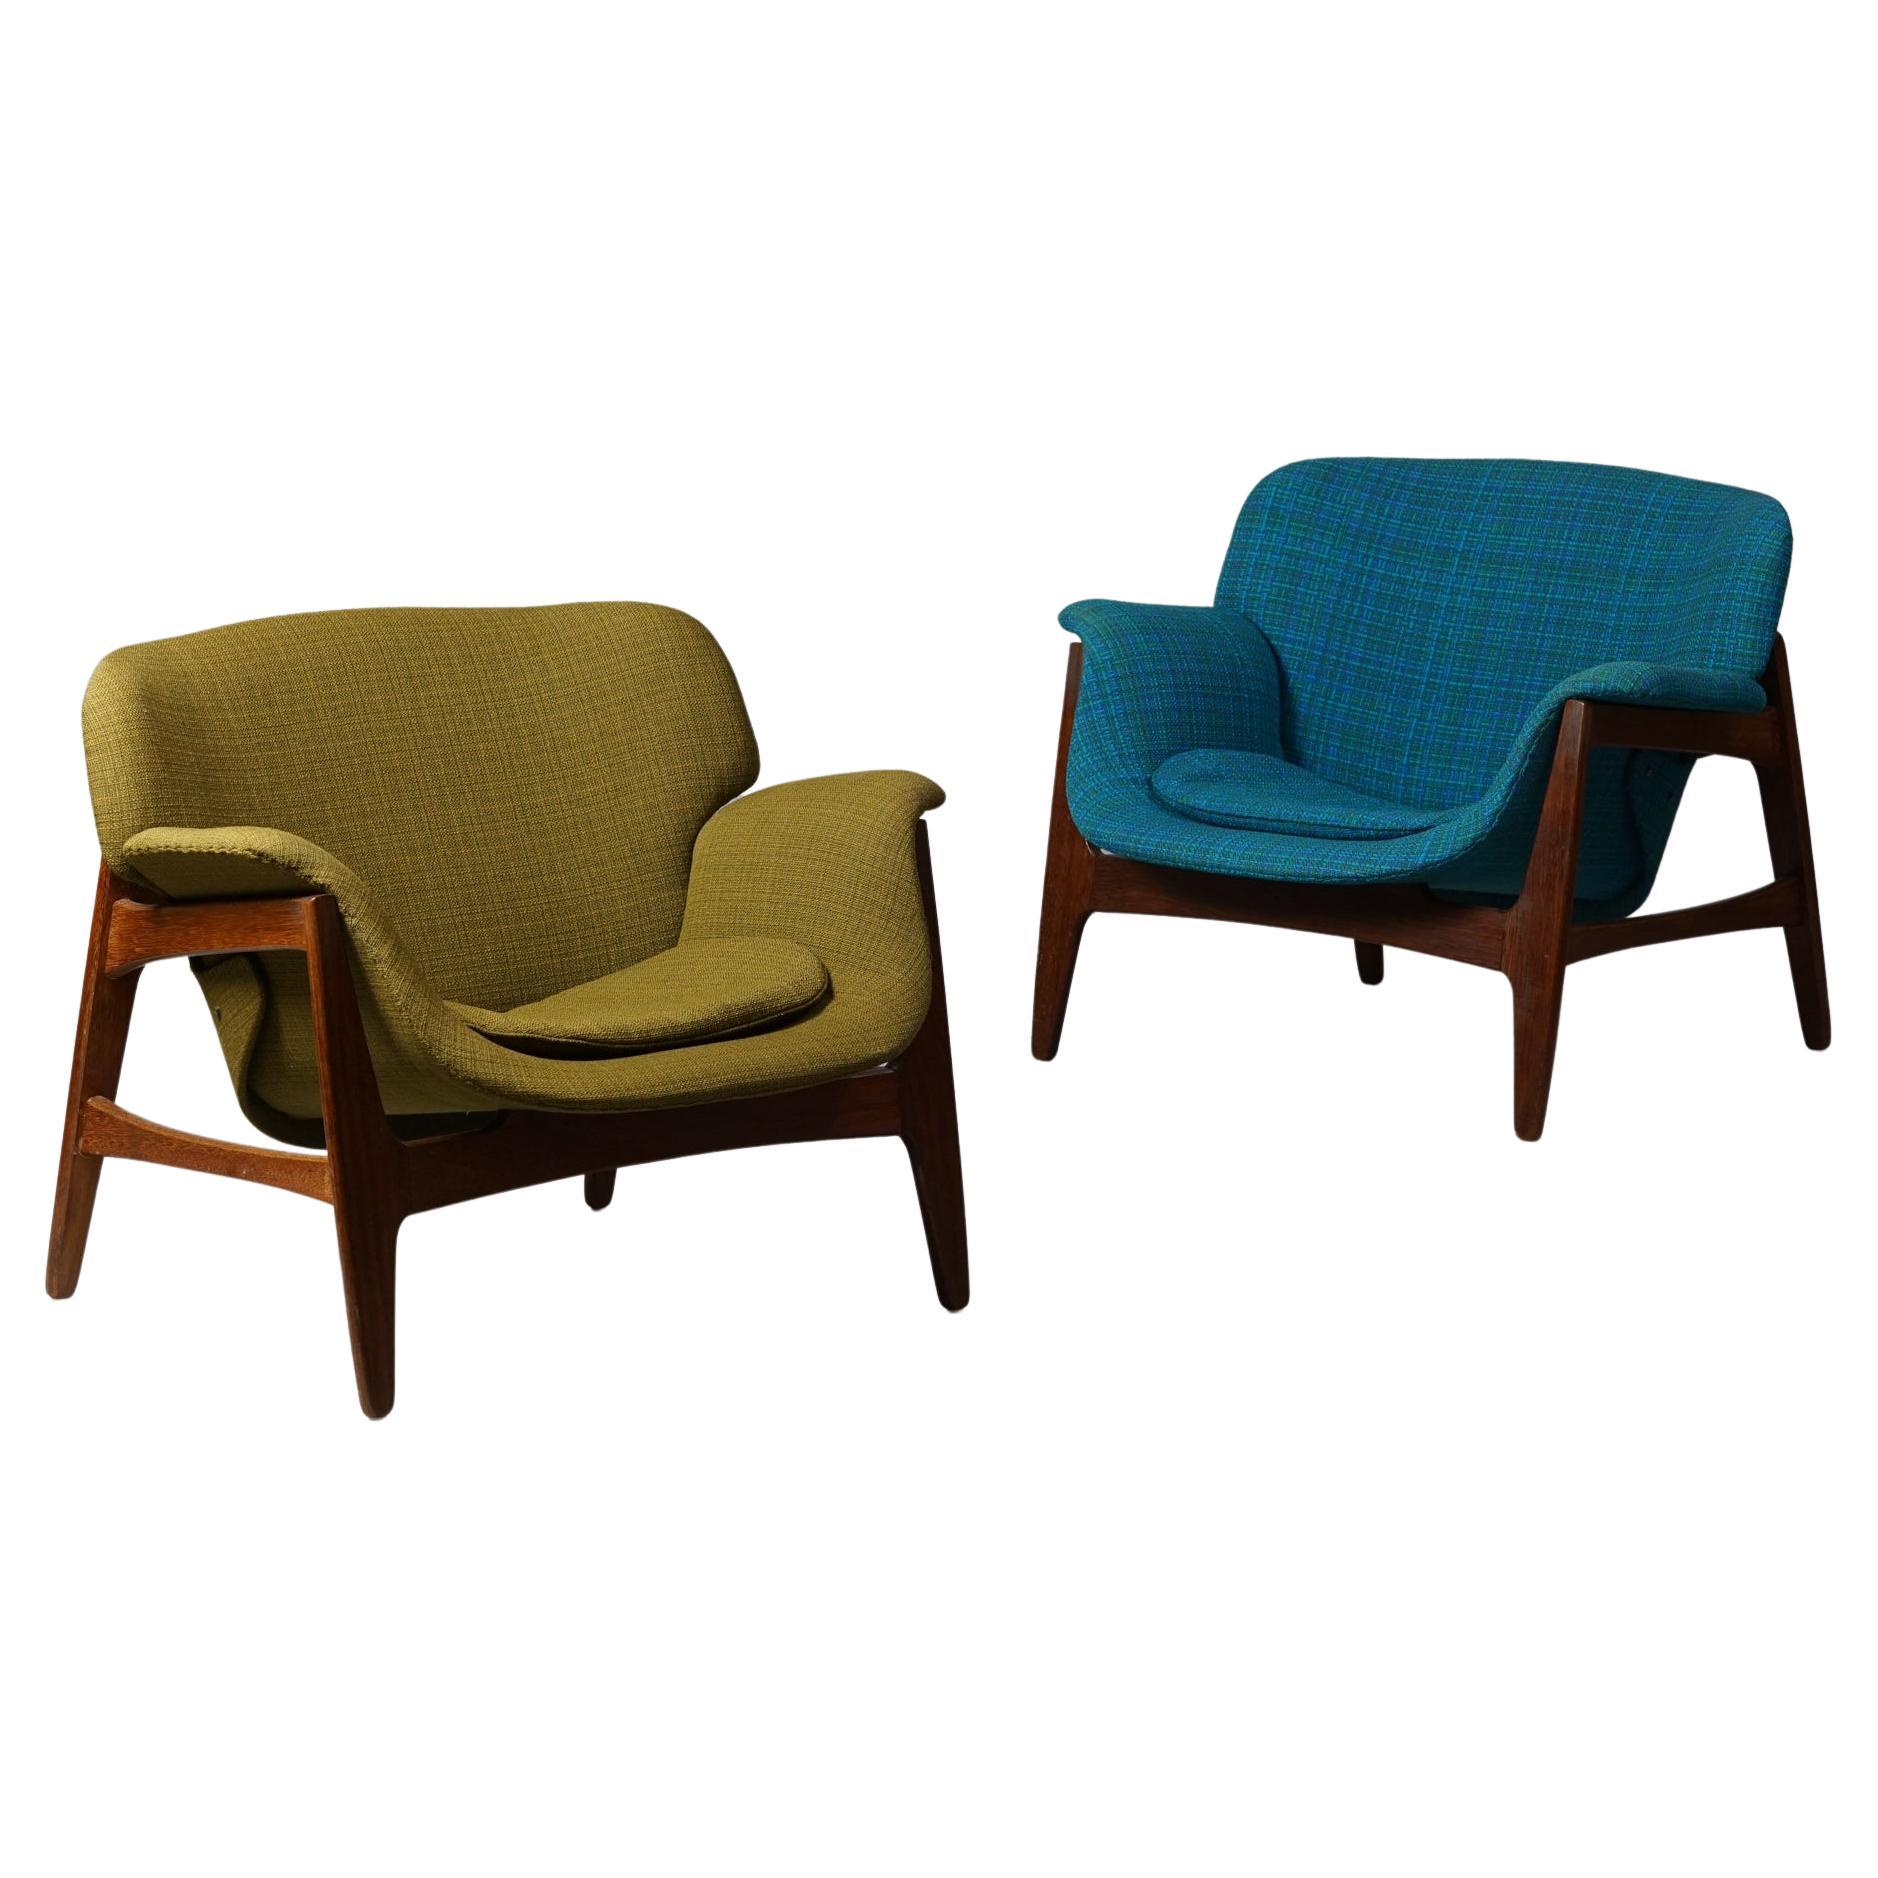 Set of Two Carin Bryggman Armchairs for Boman OY, 1950s/1960s For Sale